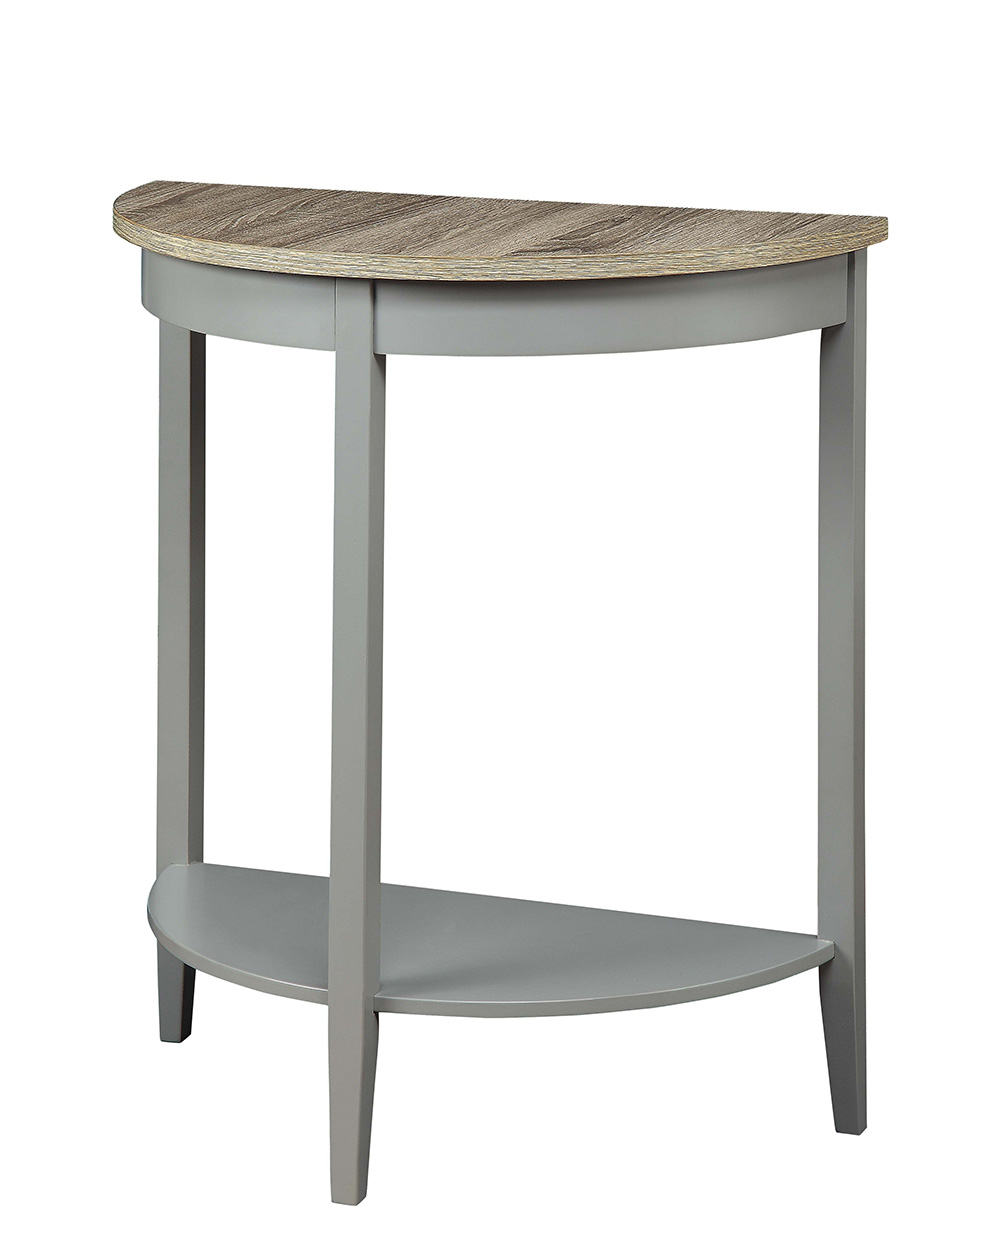 ACME Justino 26" Half-Moon Shape Console Table with Storage Shelf, for Entrance, Hallway, Dining Room, Kitchen - Gray